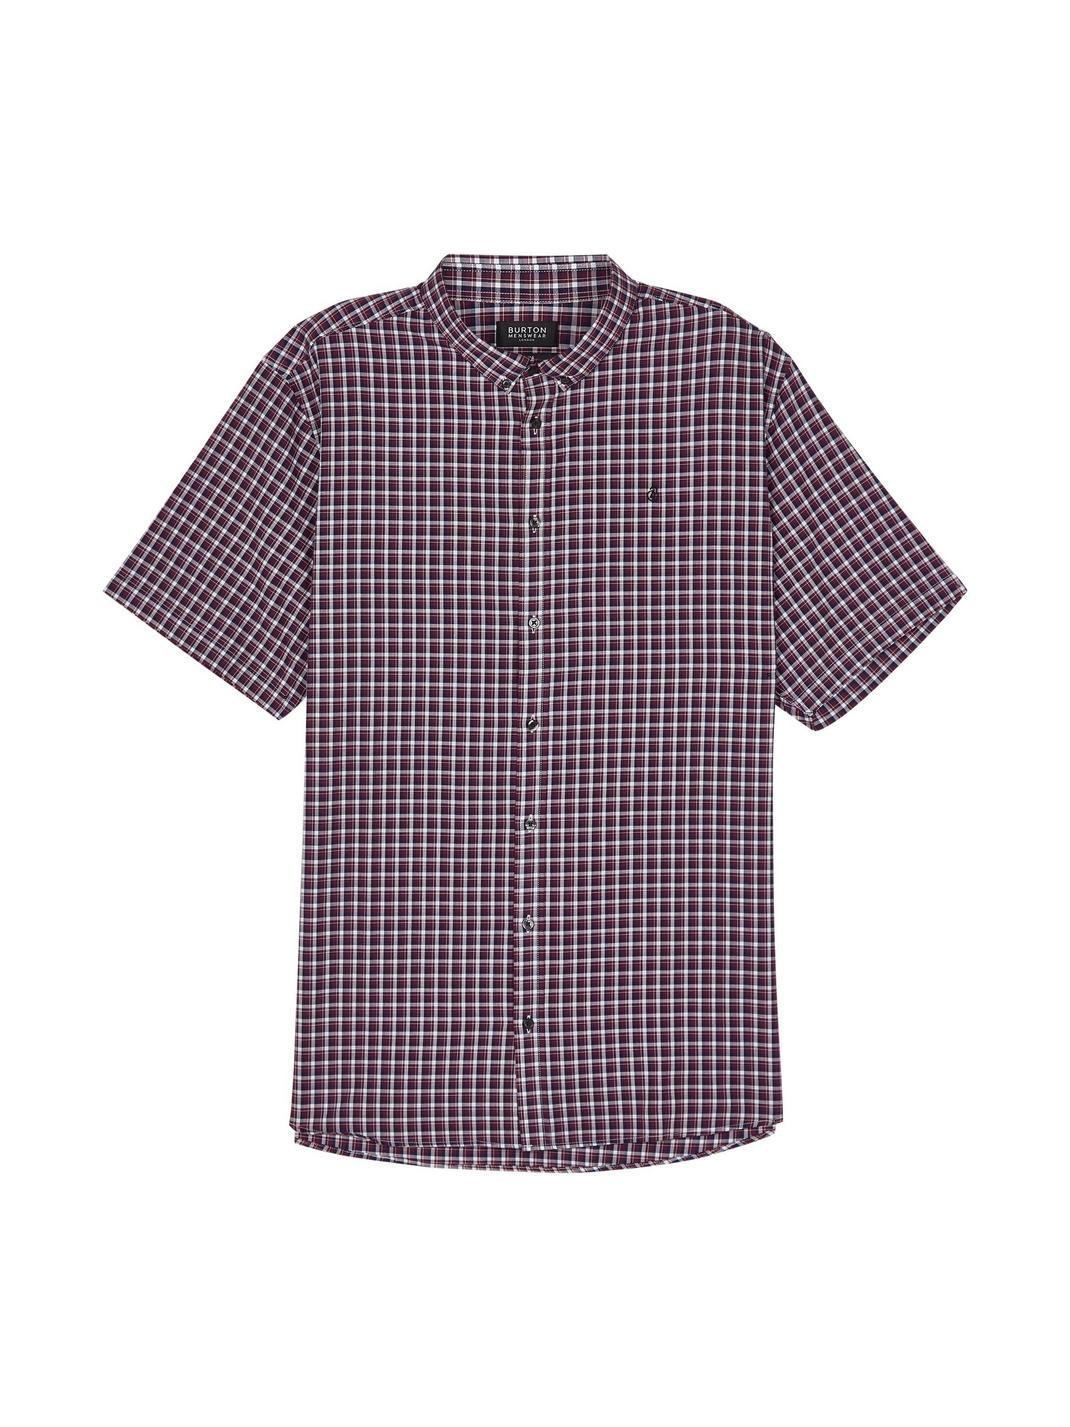 294 Plus and Tall Burgundy Check Shirt image number 1